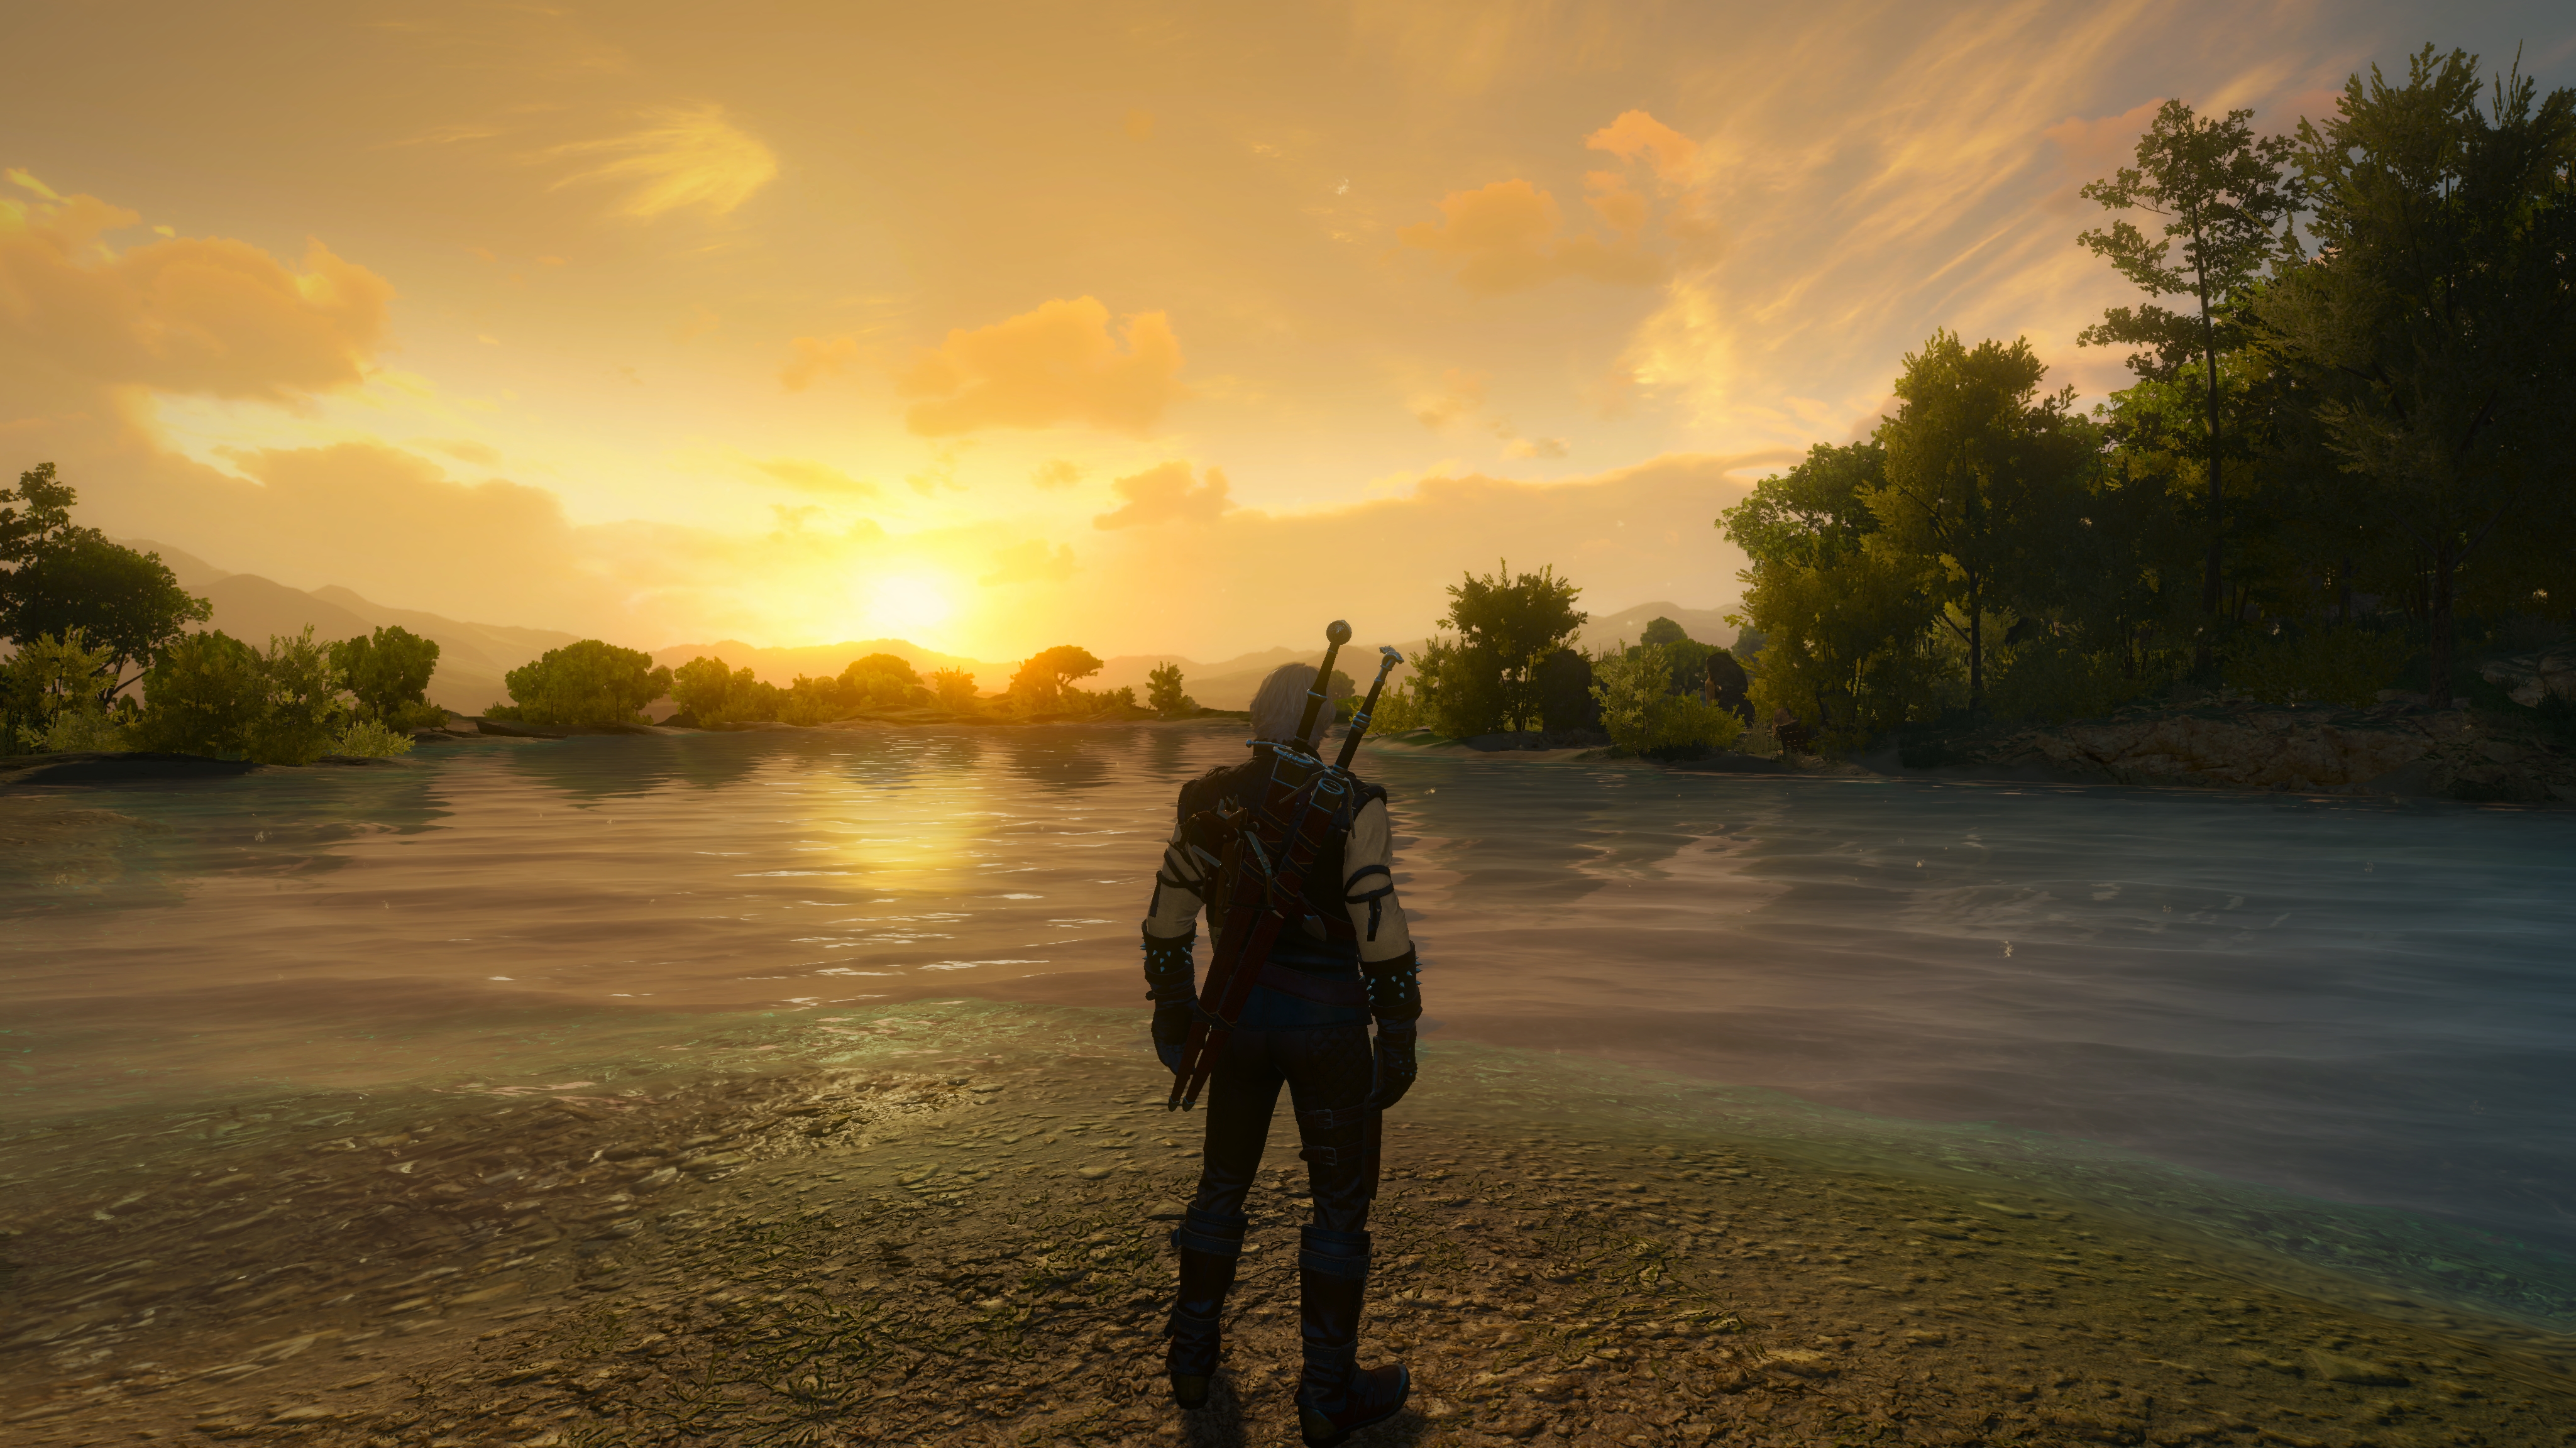 The Witcher 3 Wallpaper